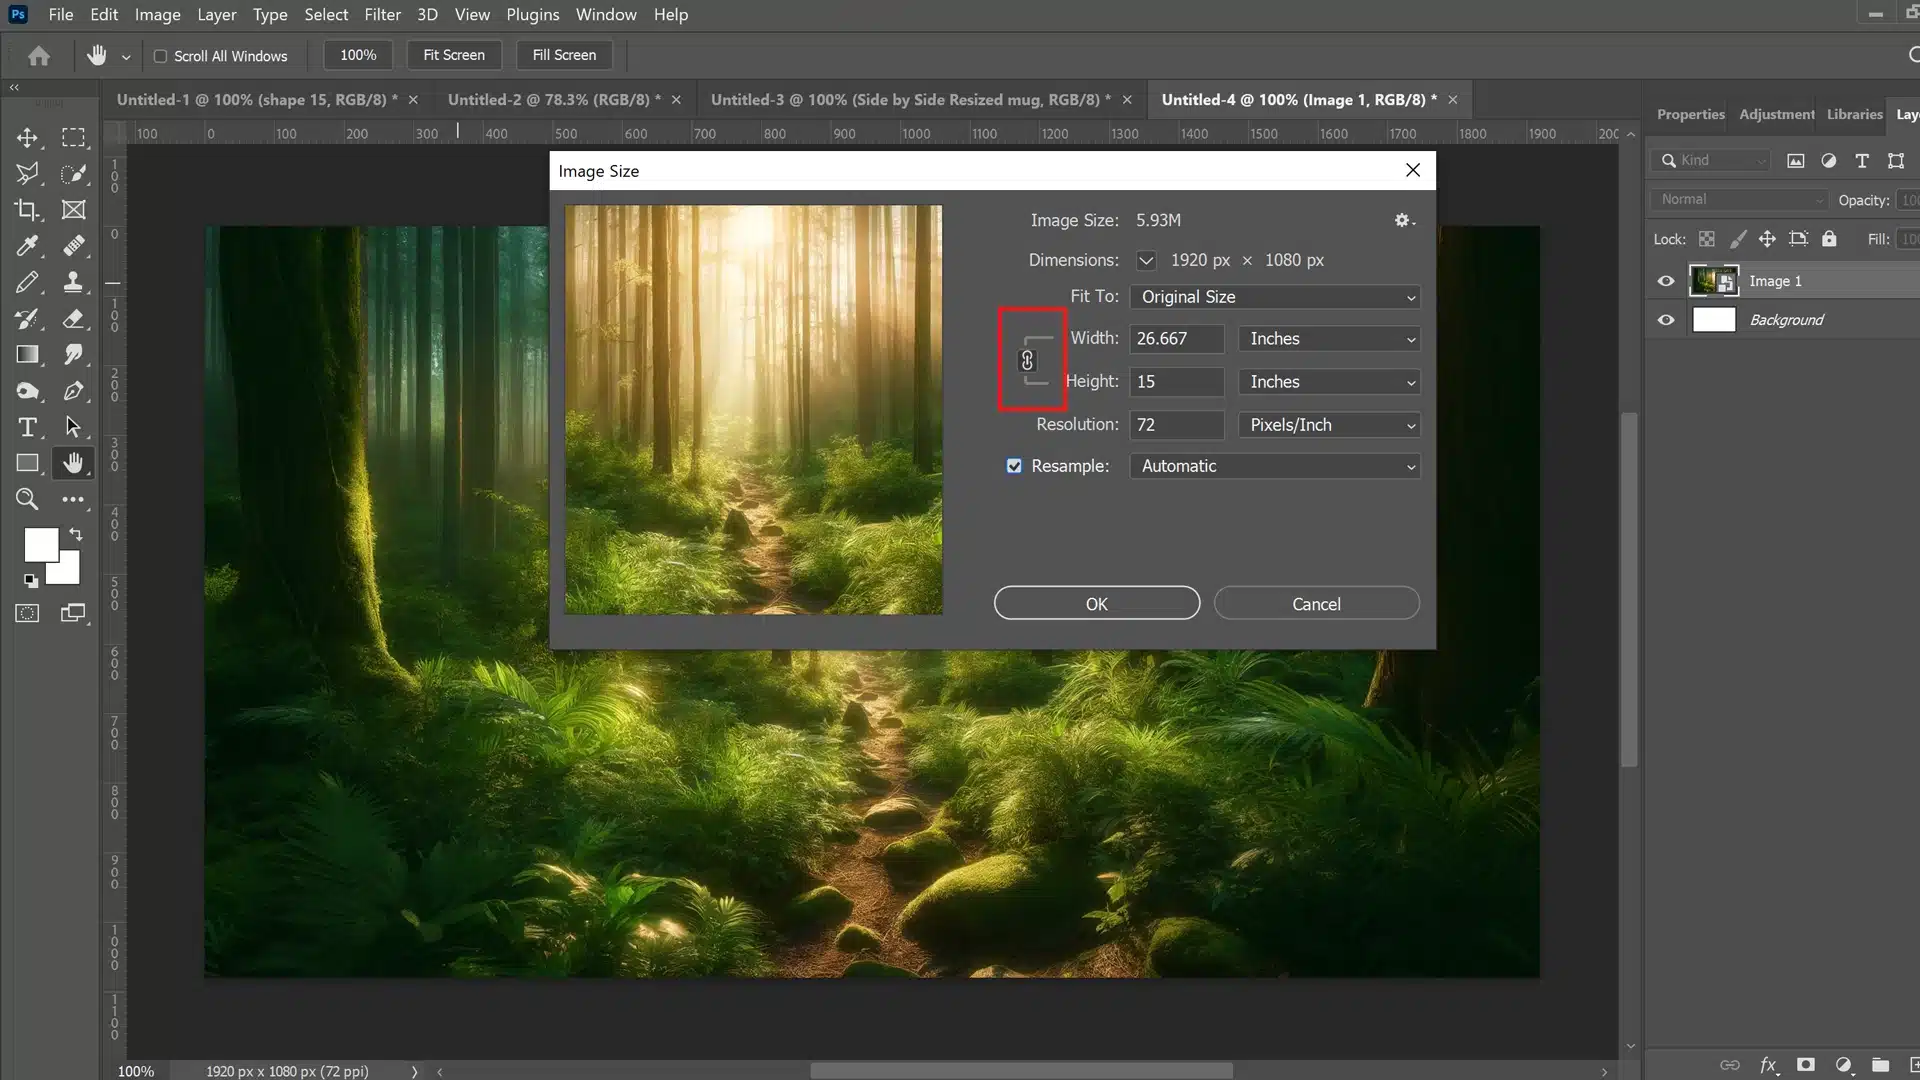 A Photoshop interface open to the 'Image Size' dialog box, set against a detailed forest scene displayed in the background, highlighting a path illuminated by sunlight filtering through the trees.